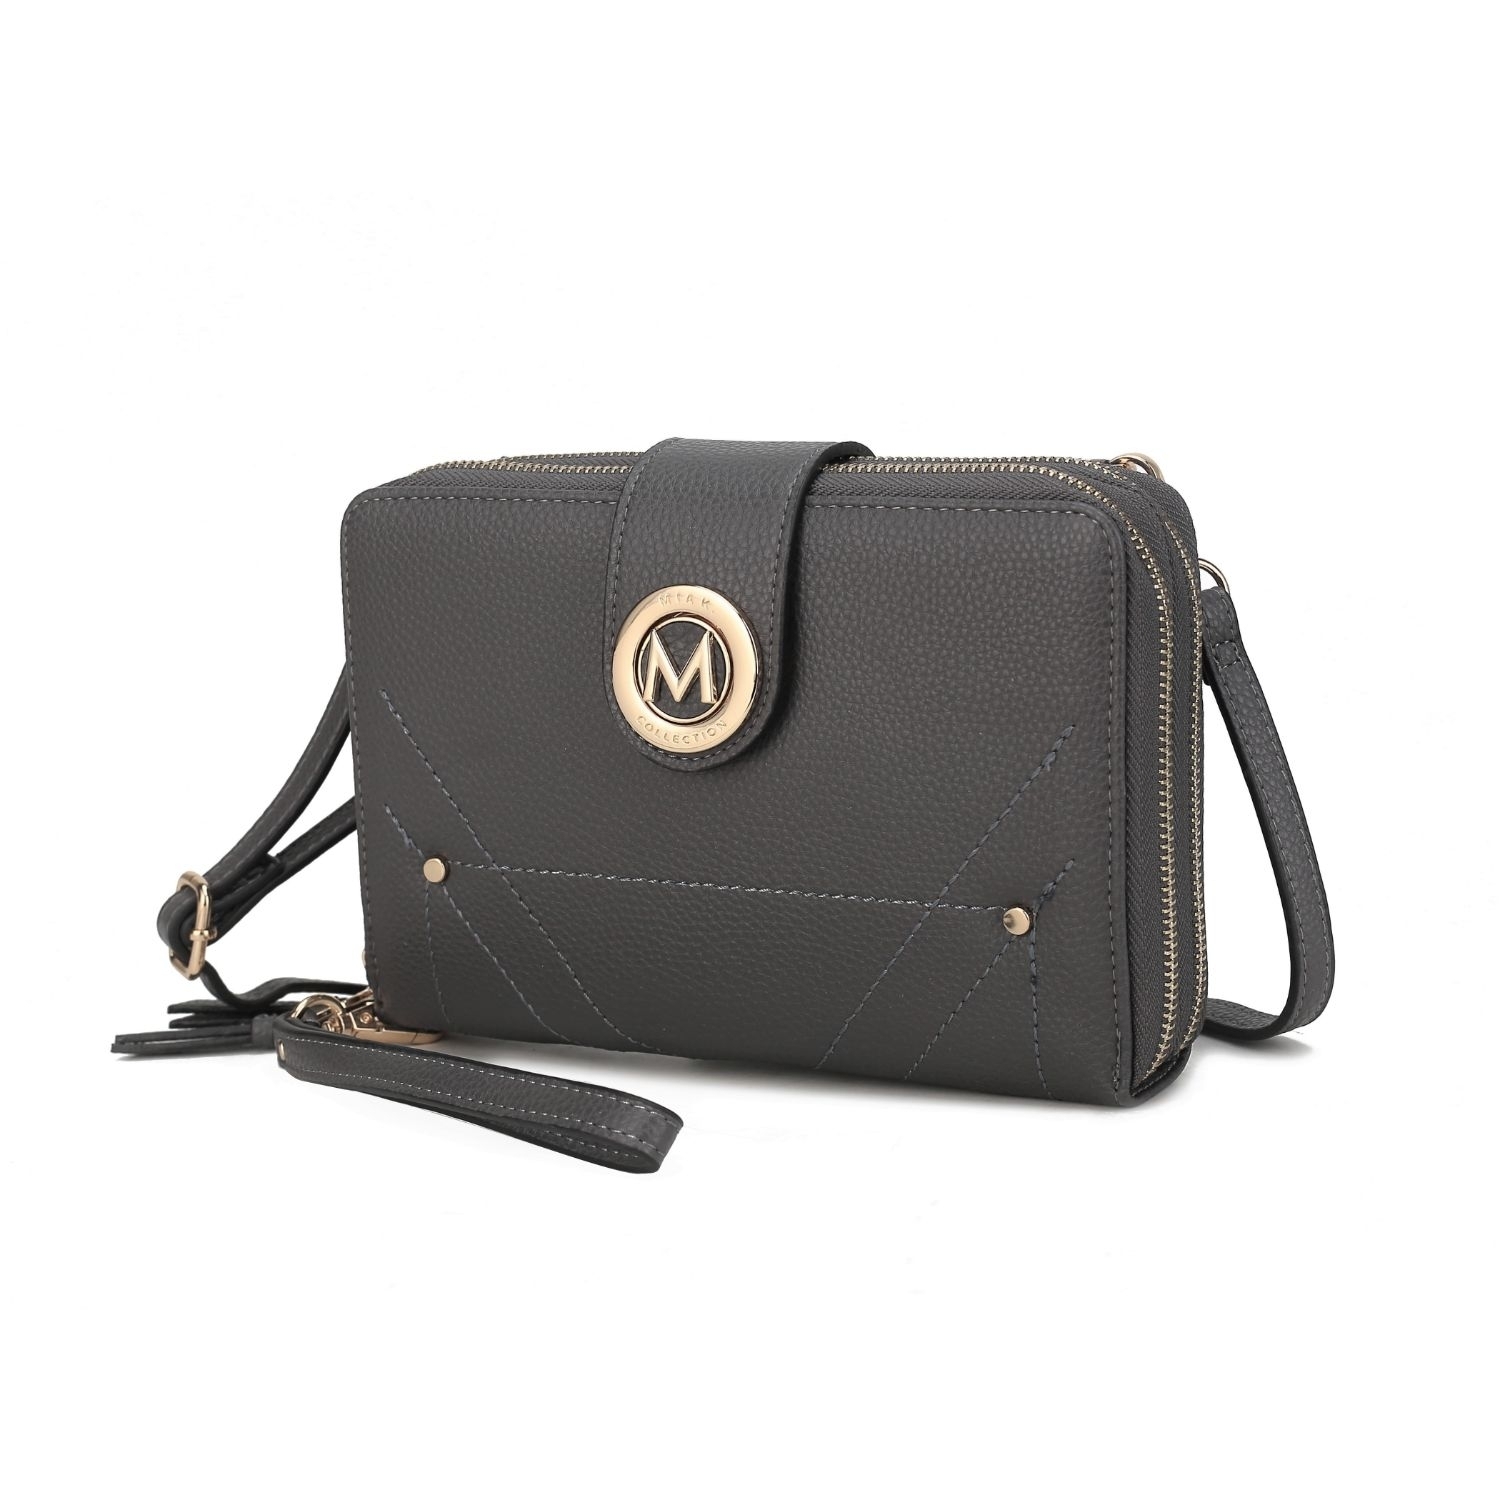 MKF Collection Sage Cell-phone - Wallet Crossbody Handbag With Optional Wristlet By Mia K - Charcoal